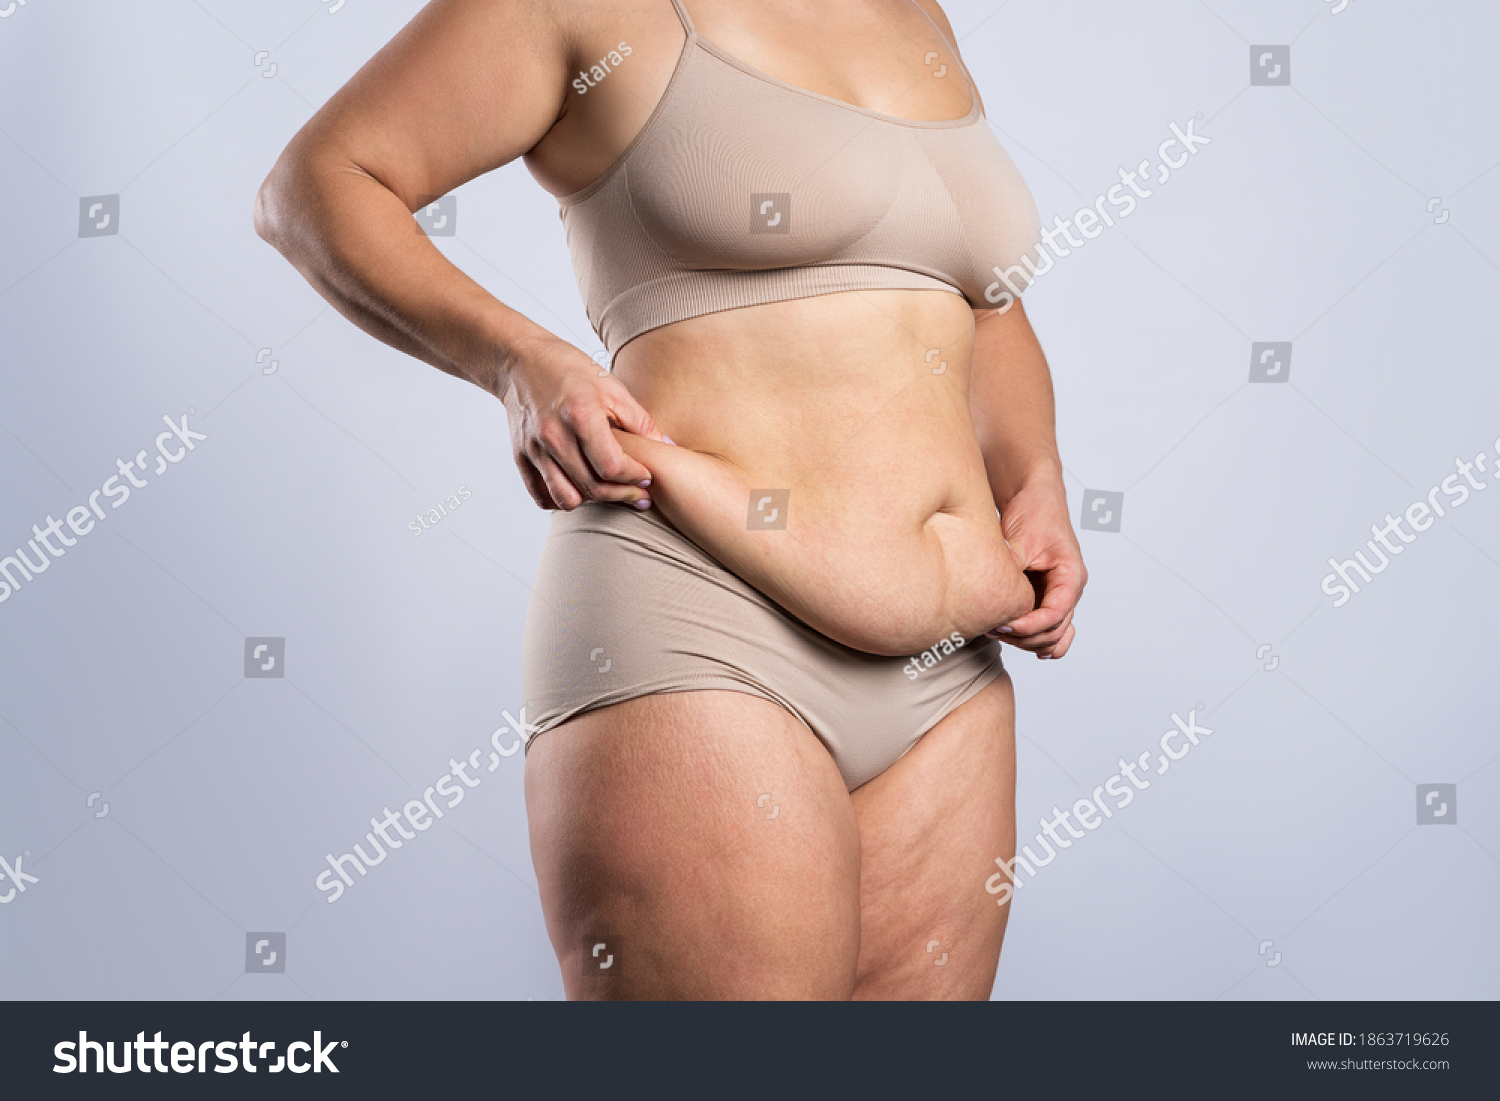 2,237 Fat Ugly Woman Images, Stock